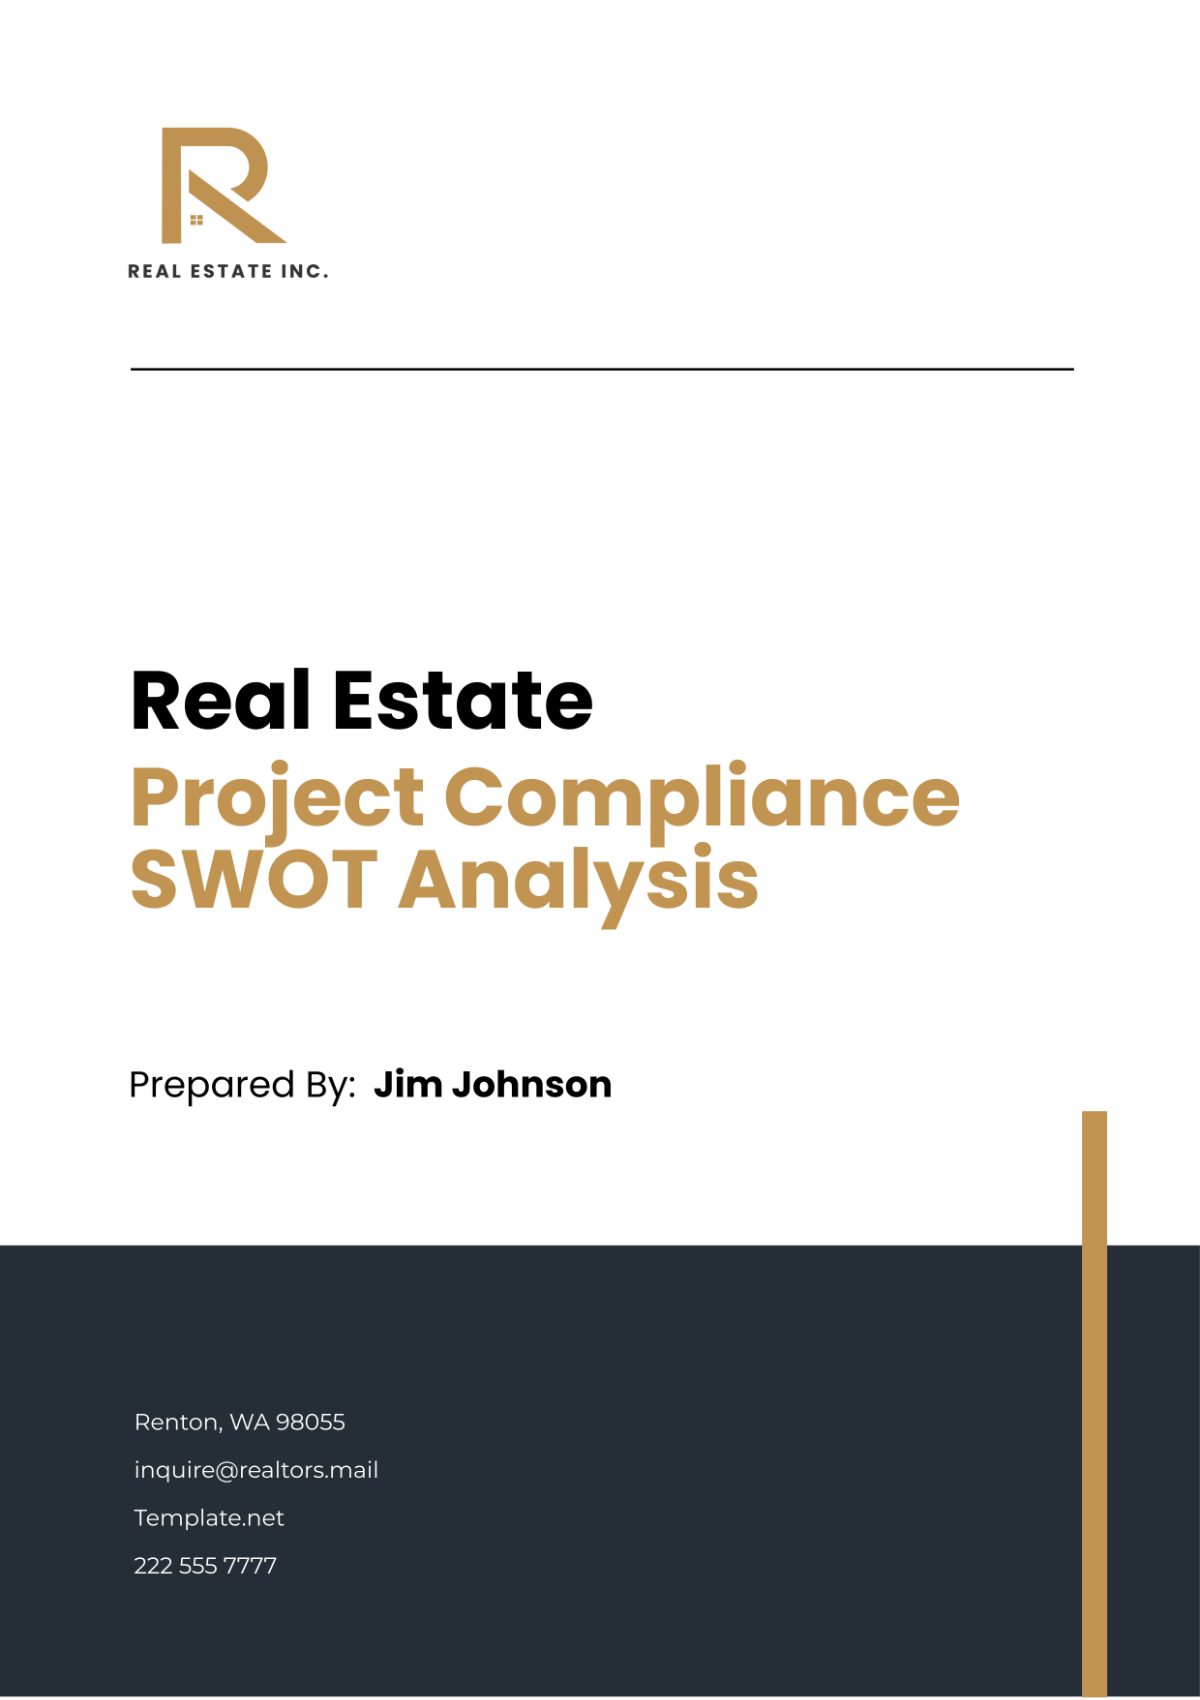 Real Estate Project Compliance SWOT Analysis Template